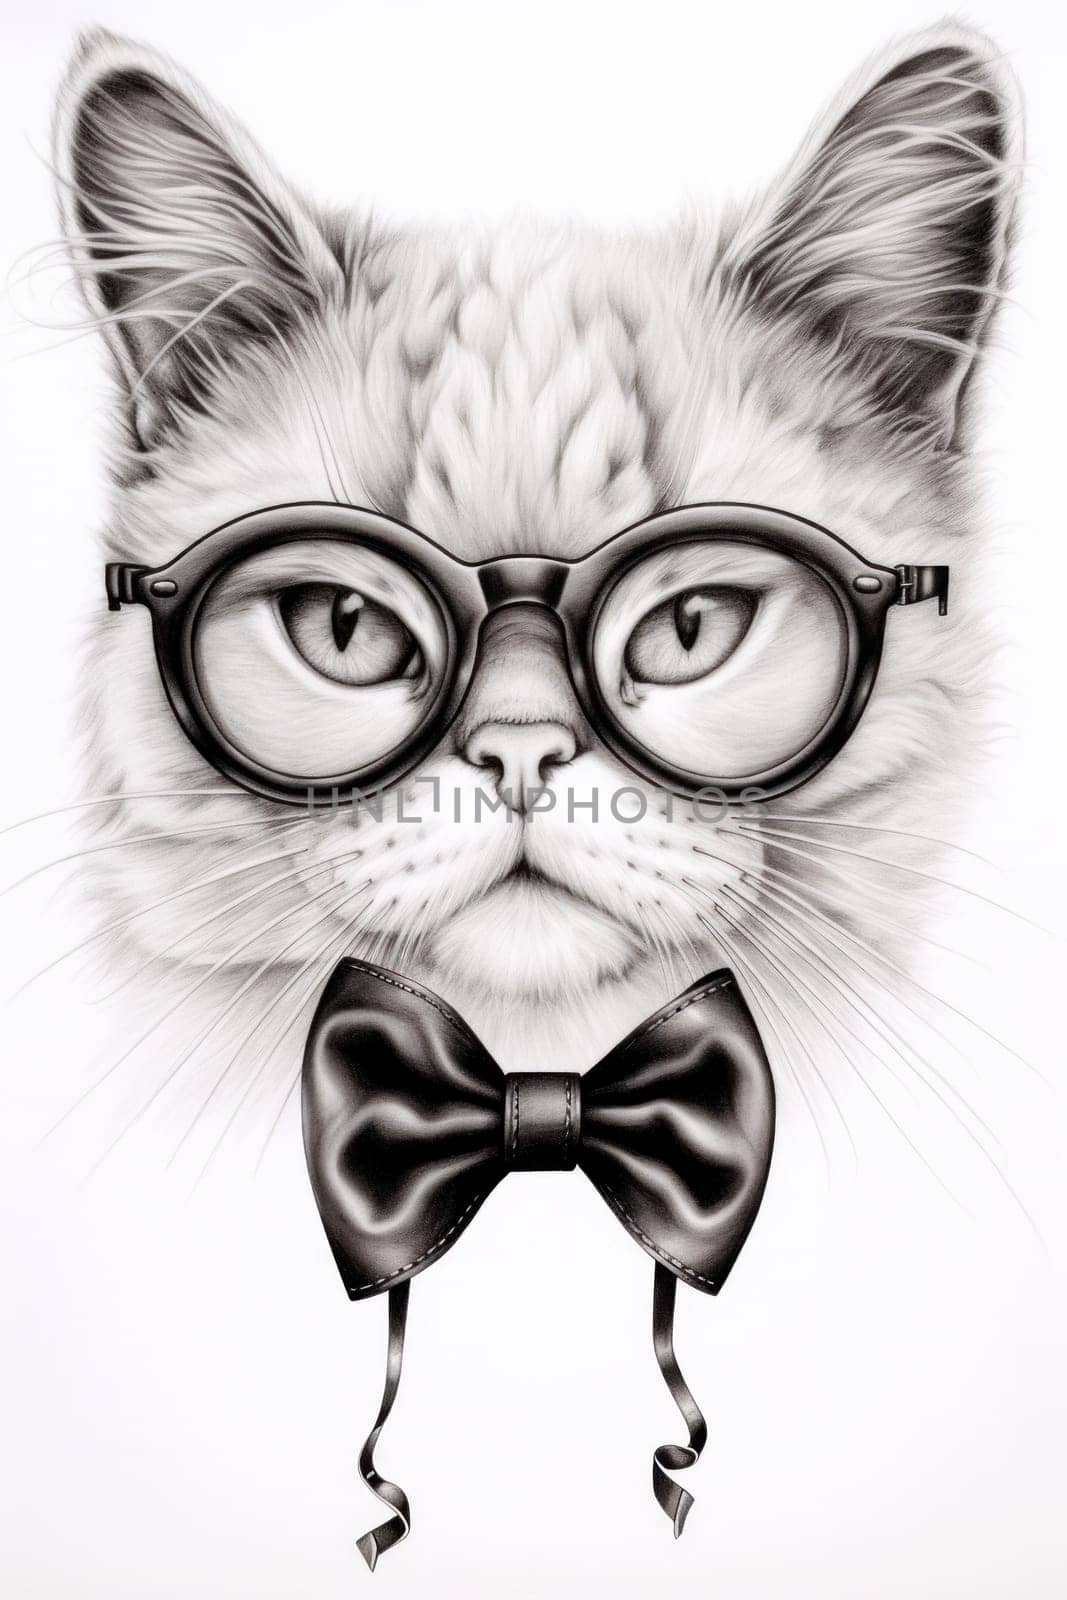 A drawing of a cat wearing glasses and a bow tie, AI by starush